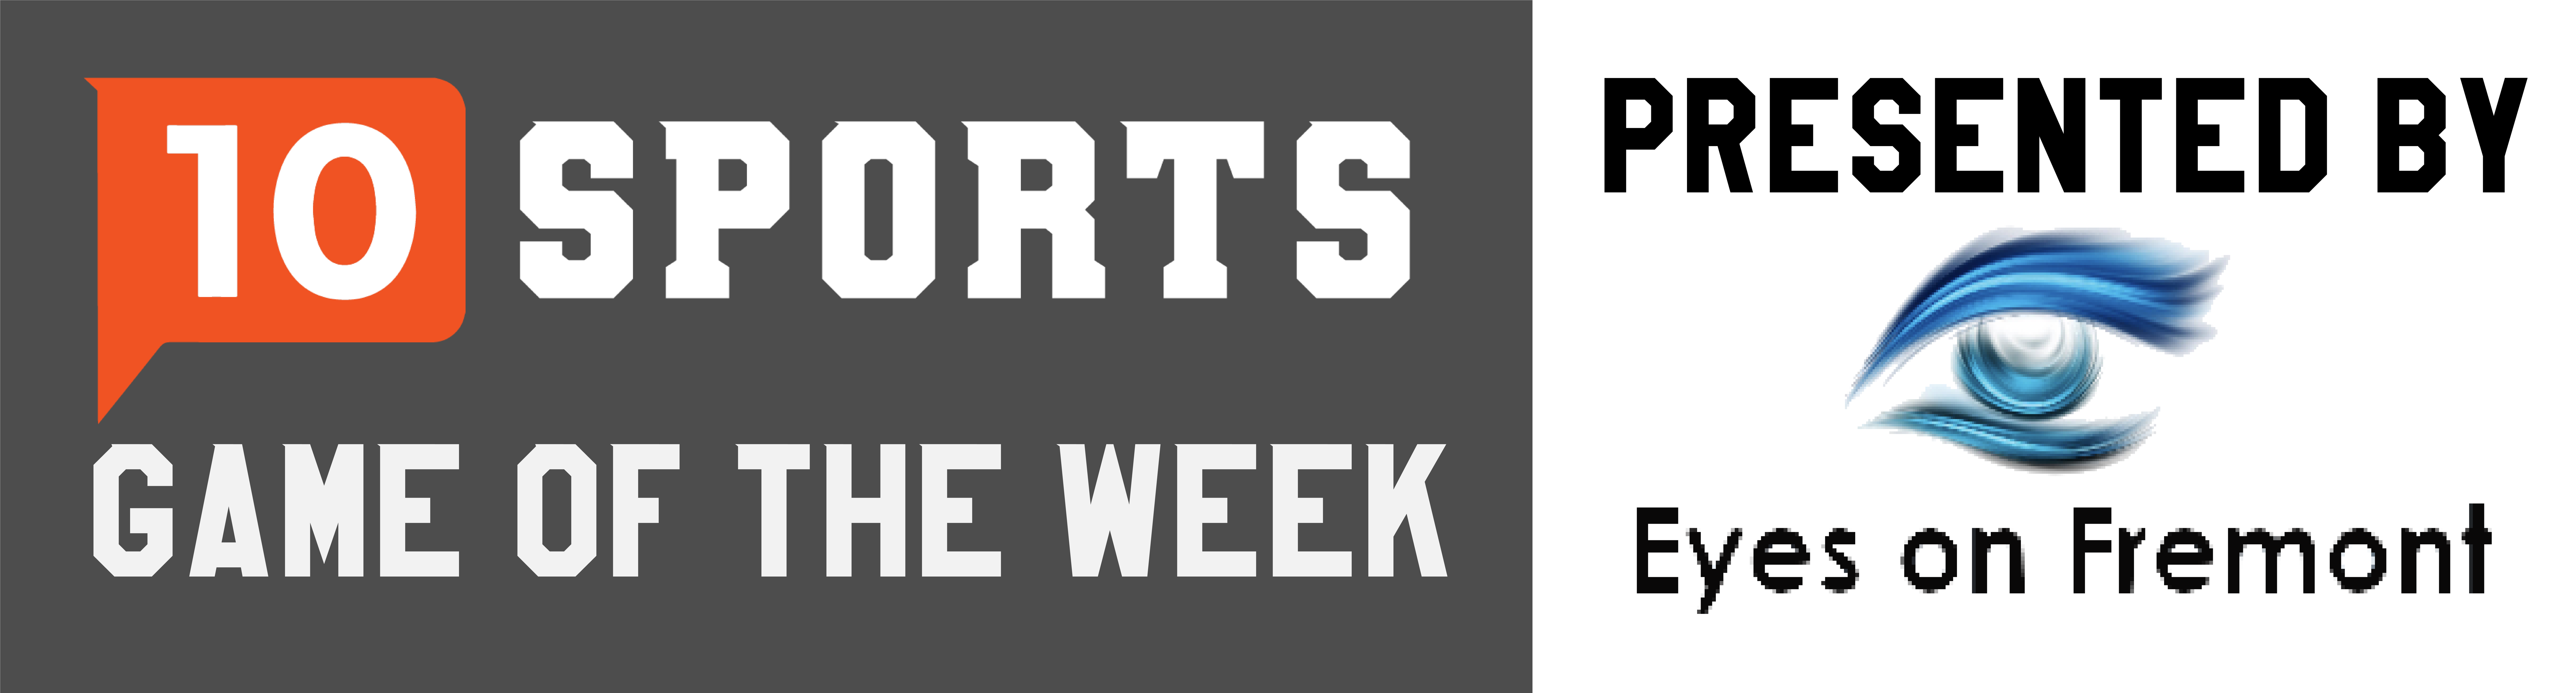 County 10 Sports Game of the Week starts Thursday in Shoshoni